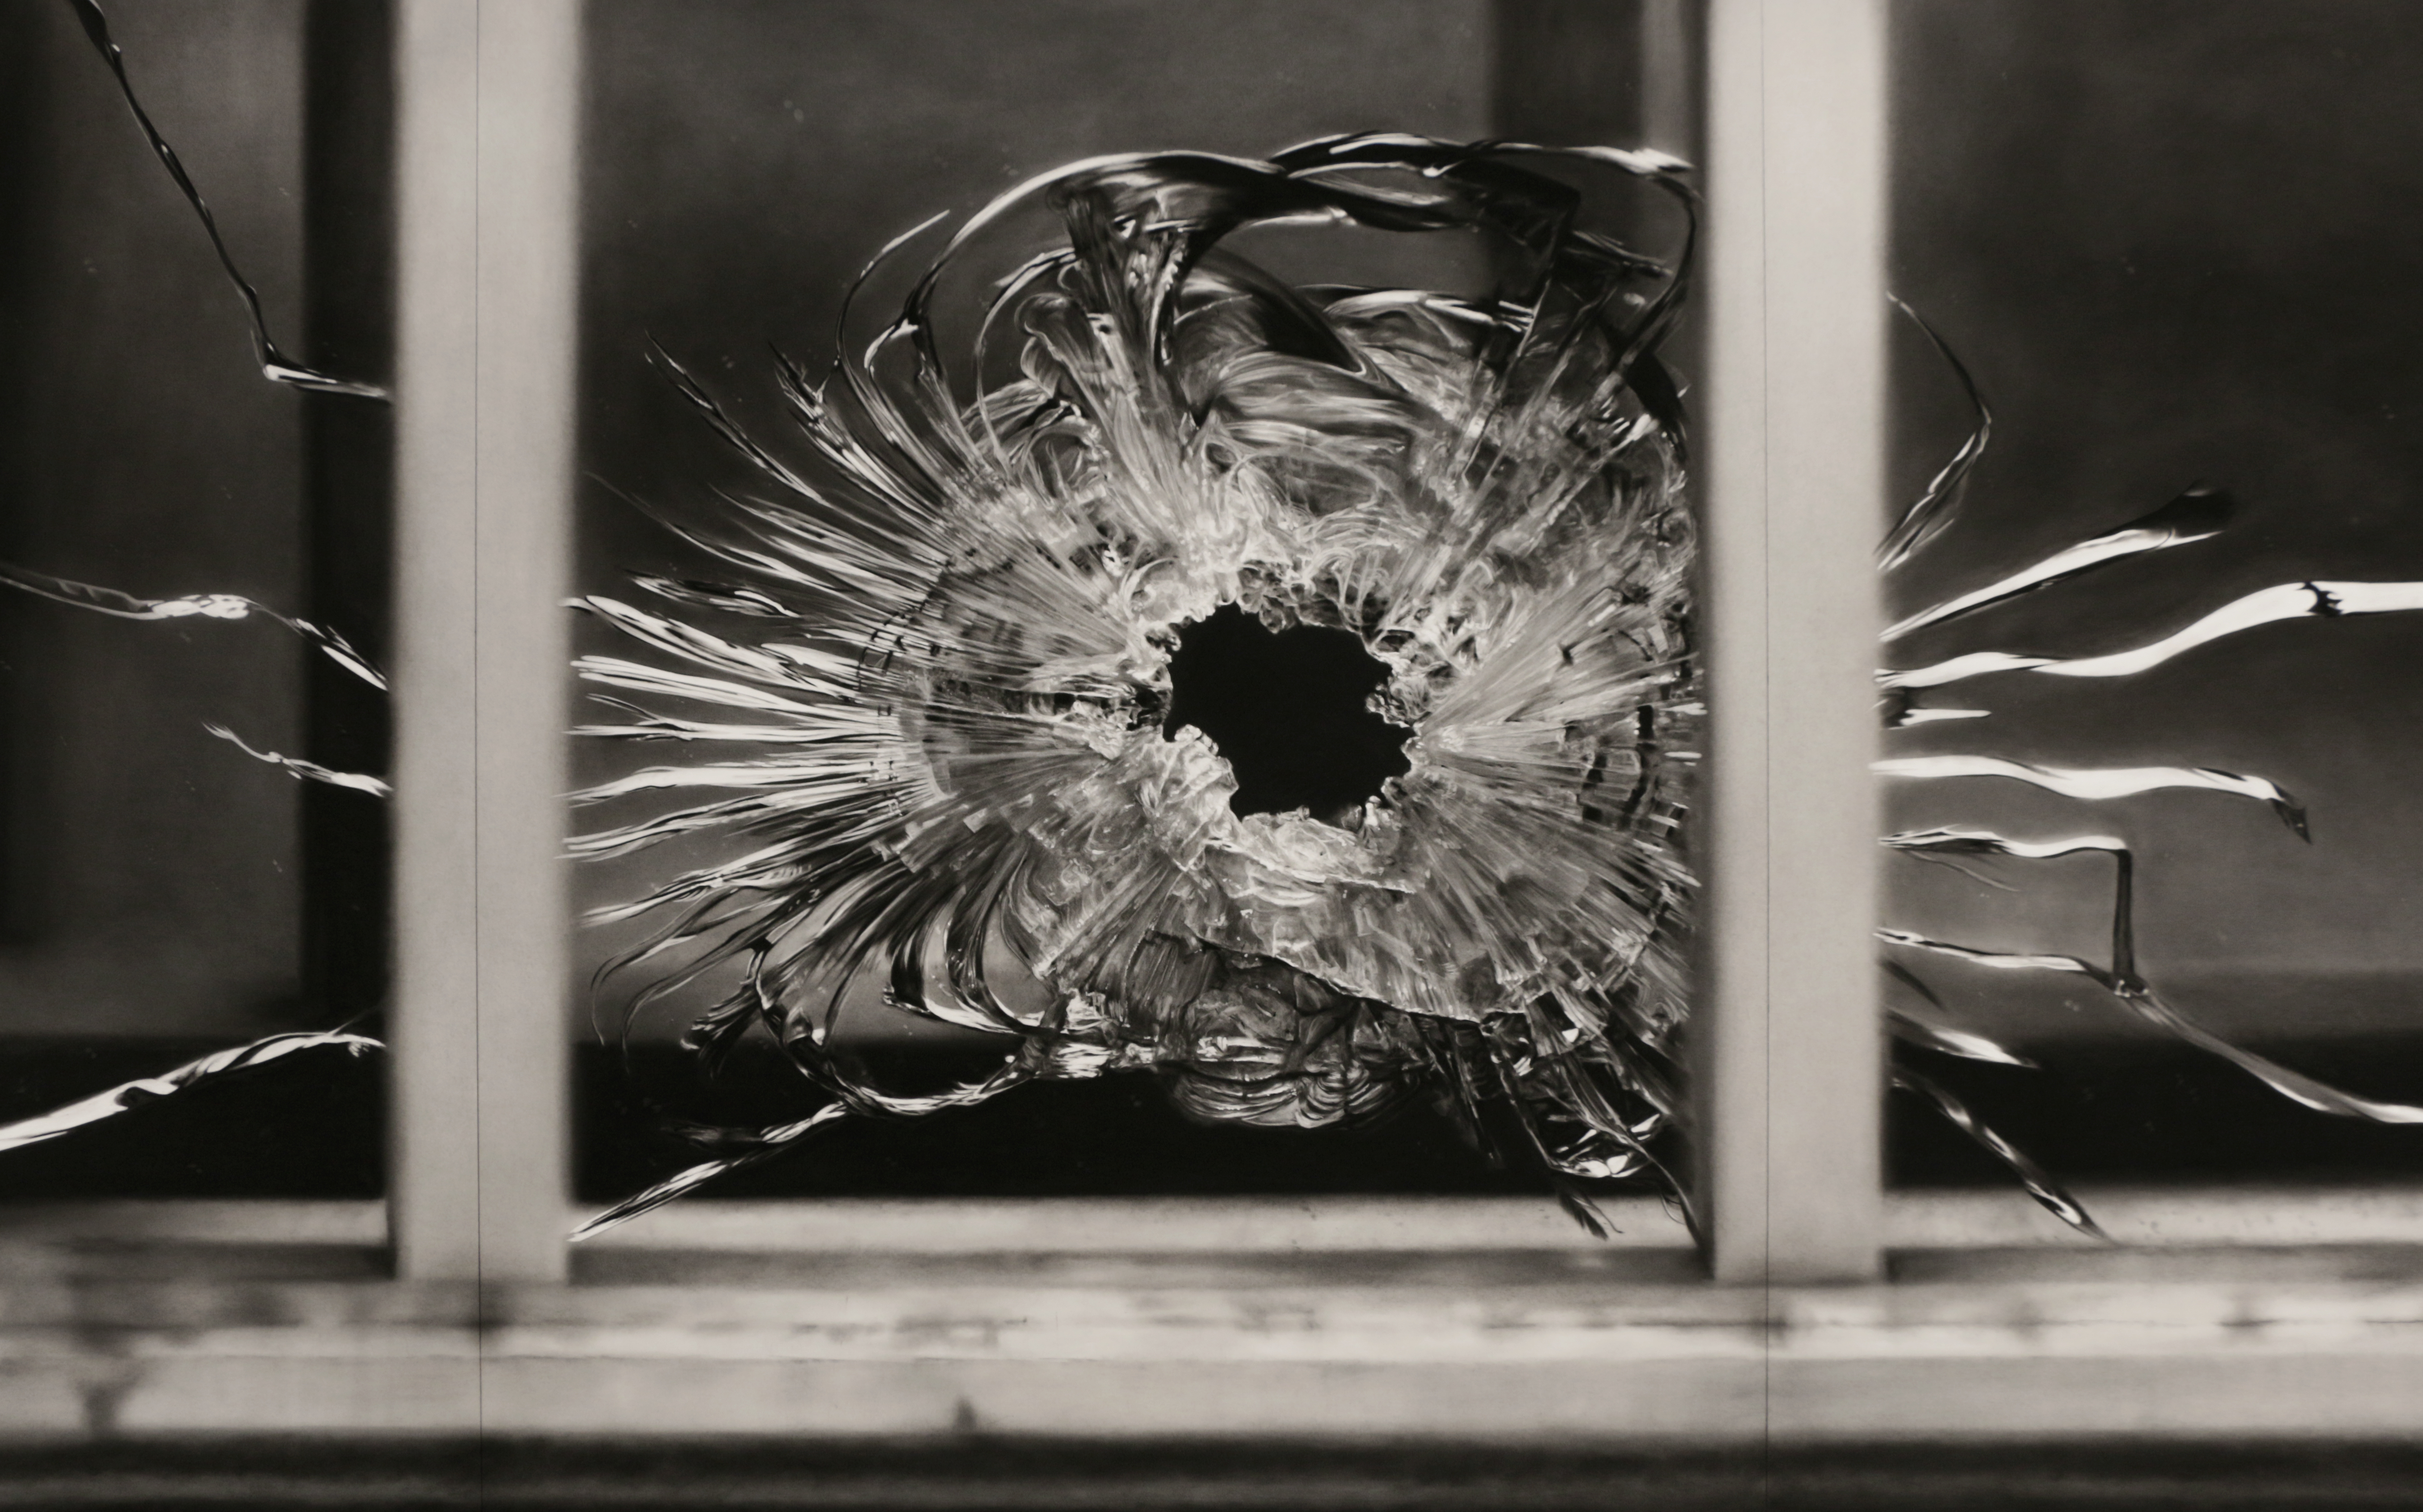 Bullet Hole in Window, January 7, 2015, (2015-2016) by Robert Longo. Image courtesy of Galerie Thaddaeus Ropac